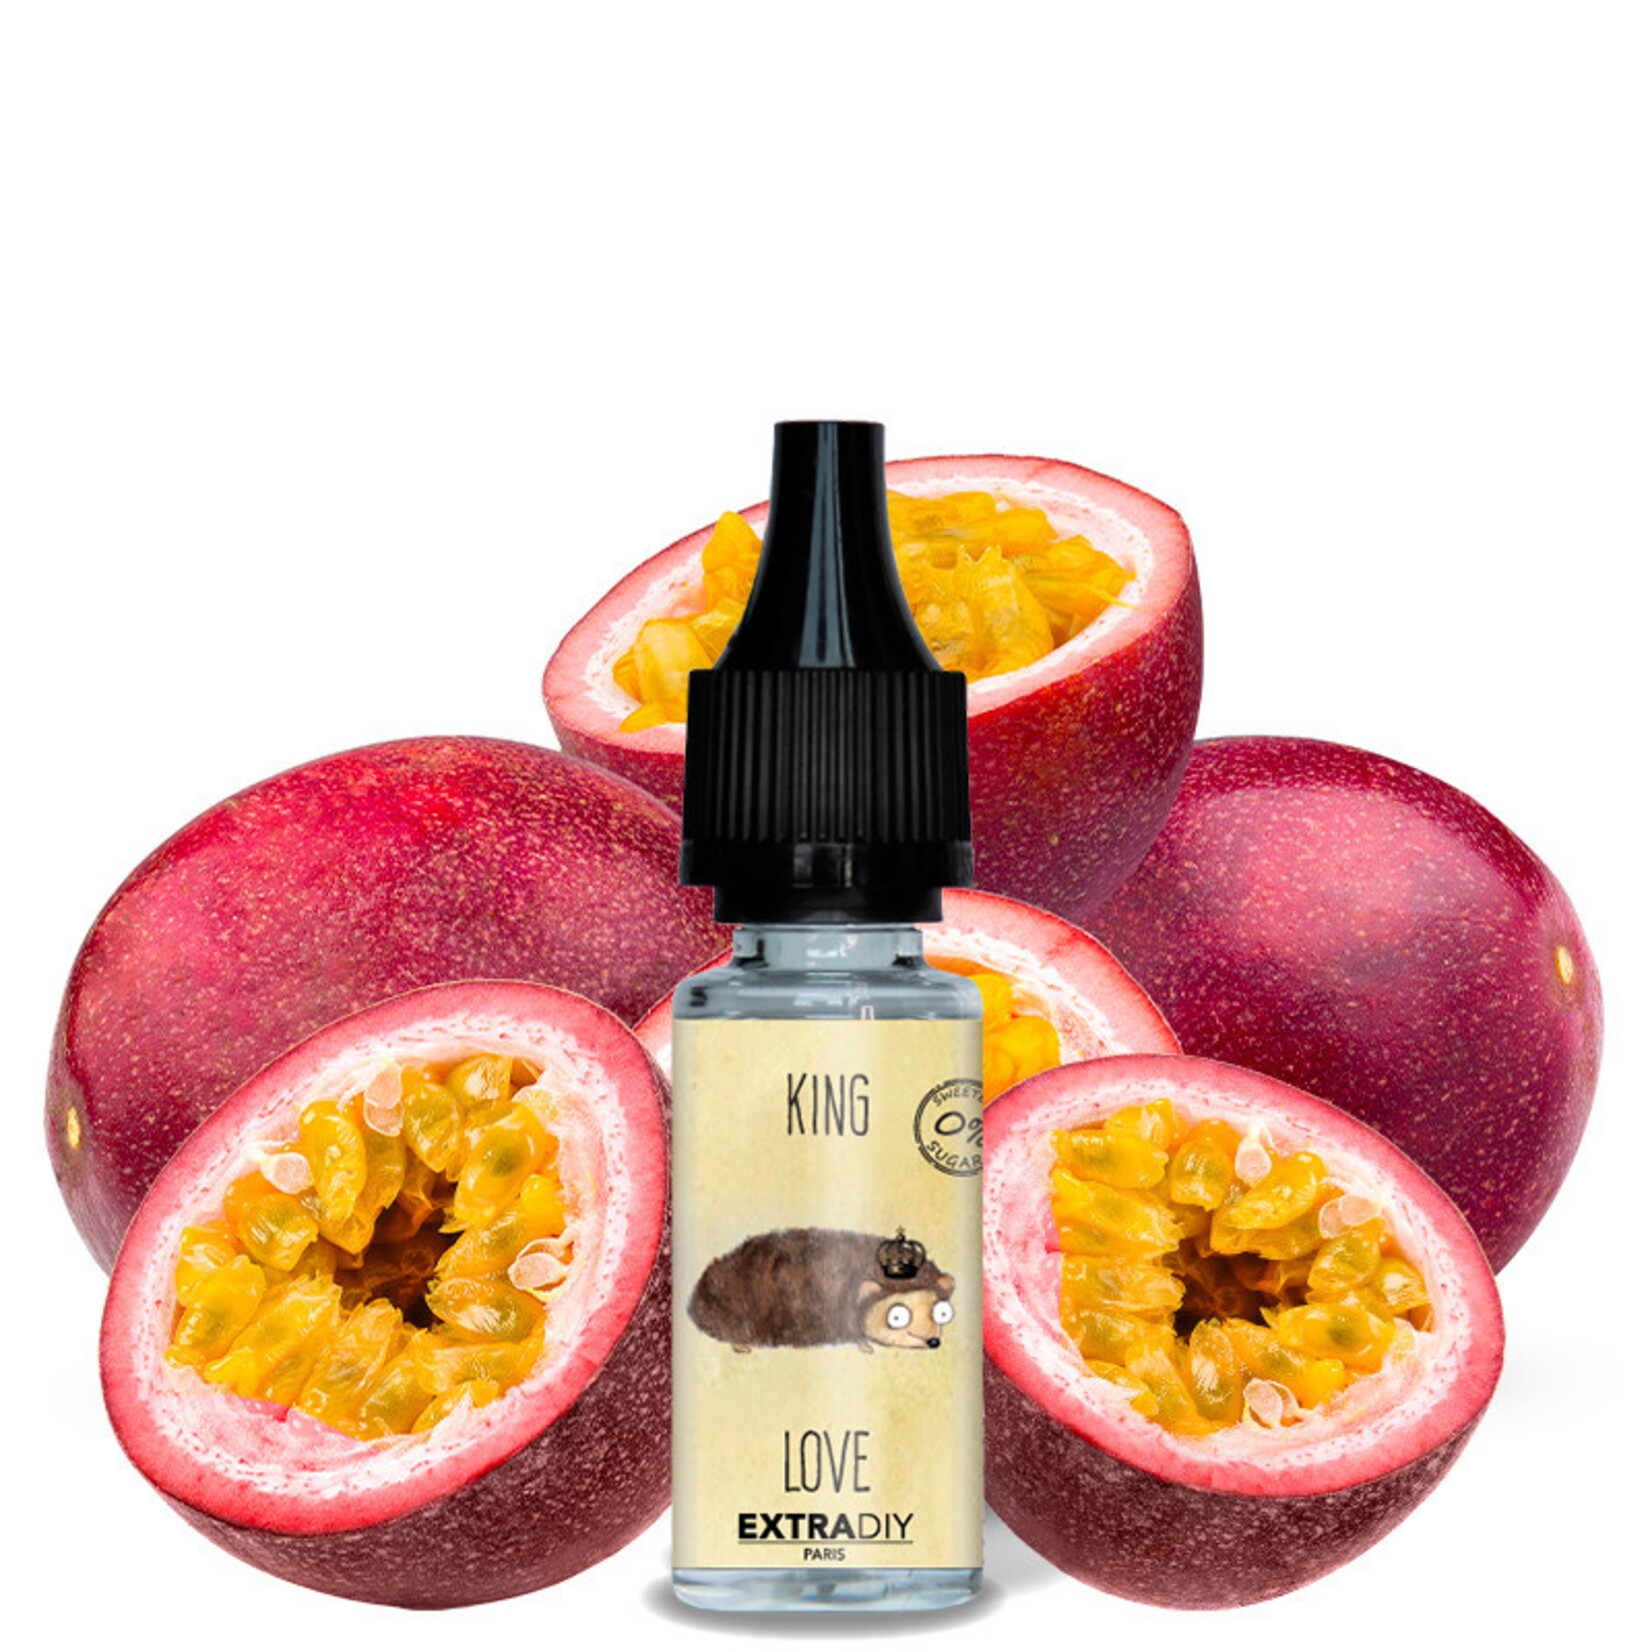 ExtraPur King Love Passionsfrucht Aroma